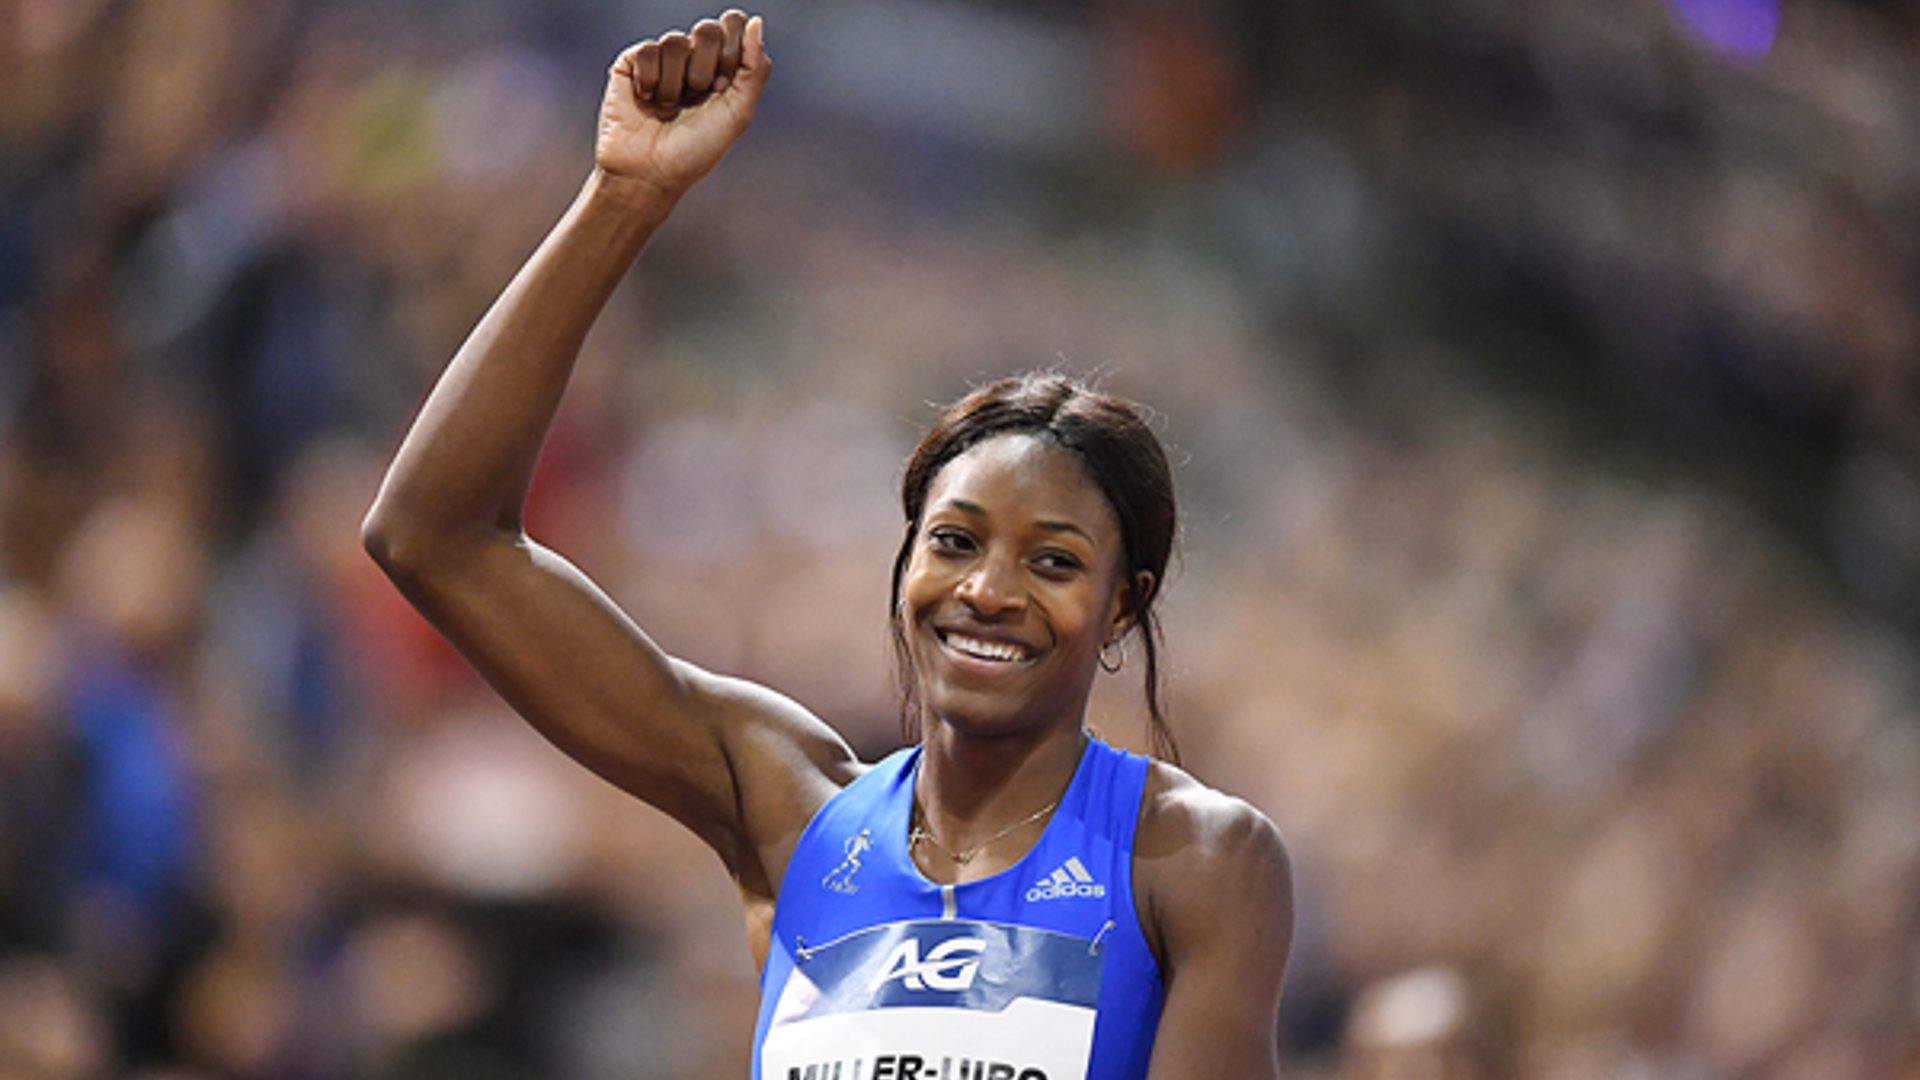 Shaunae Miller-Uibo in a file photo (Image Credits - World Athletics)